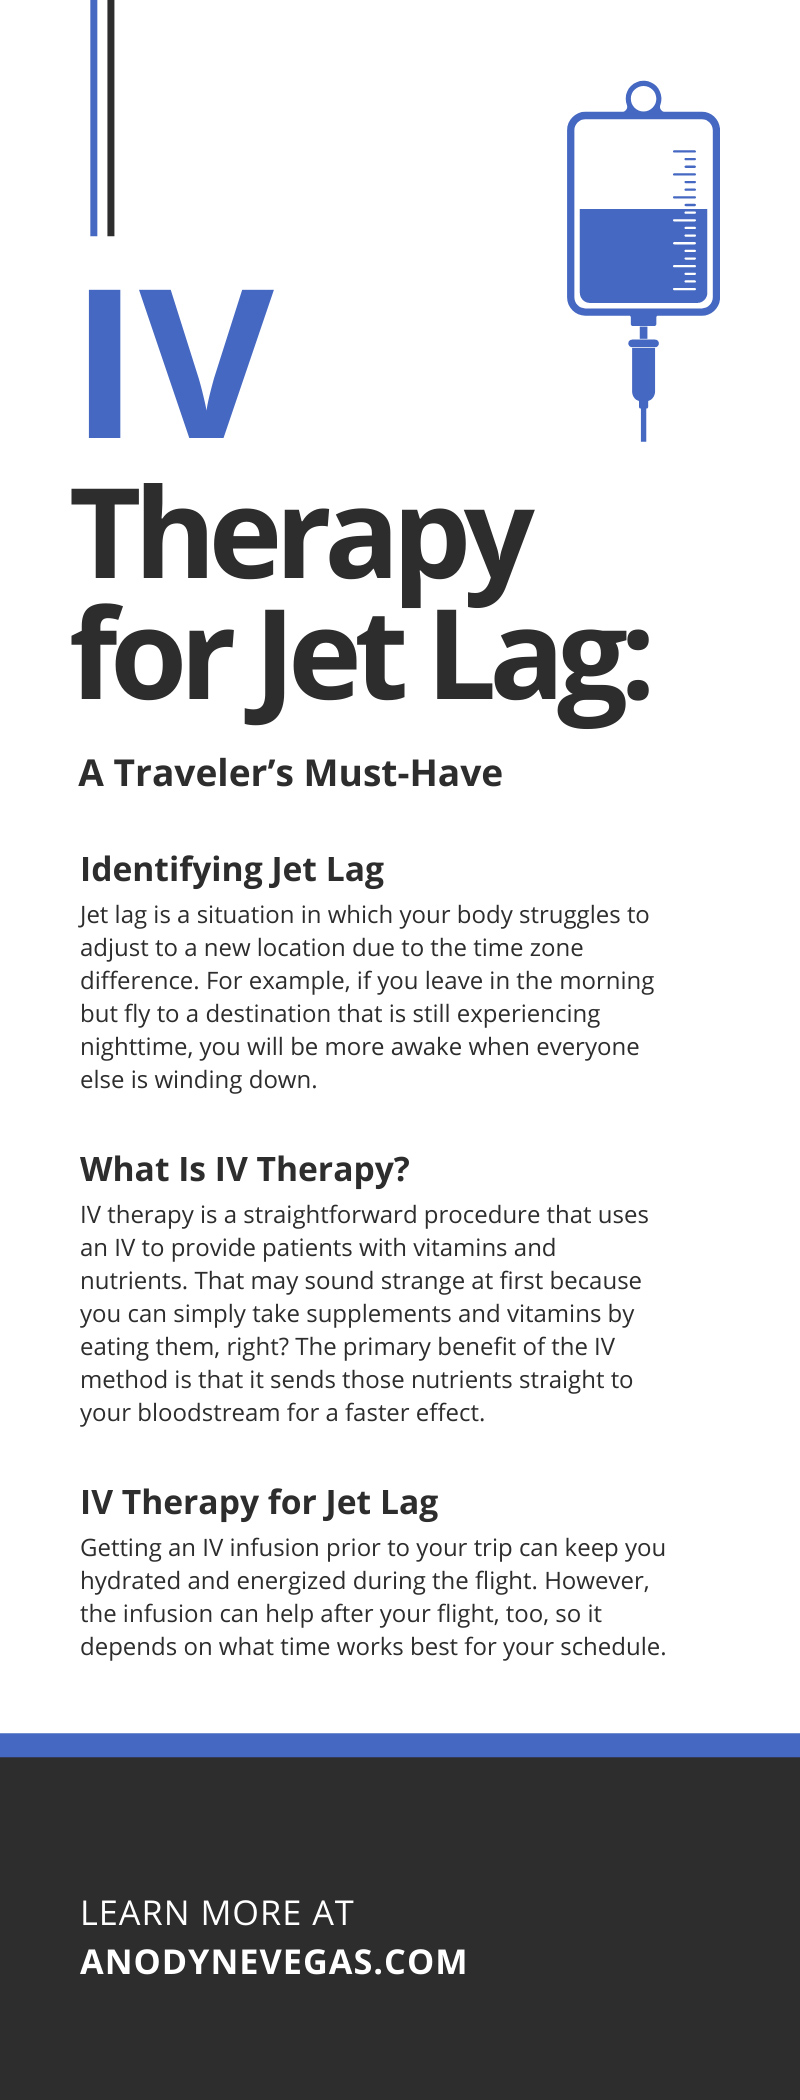 IV Therapy for Jet Lag: A Traveler’s Must-Have